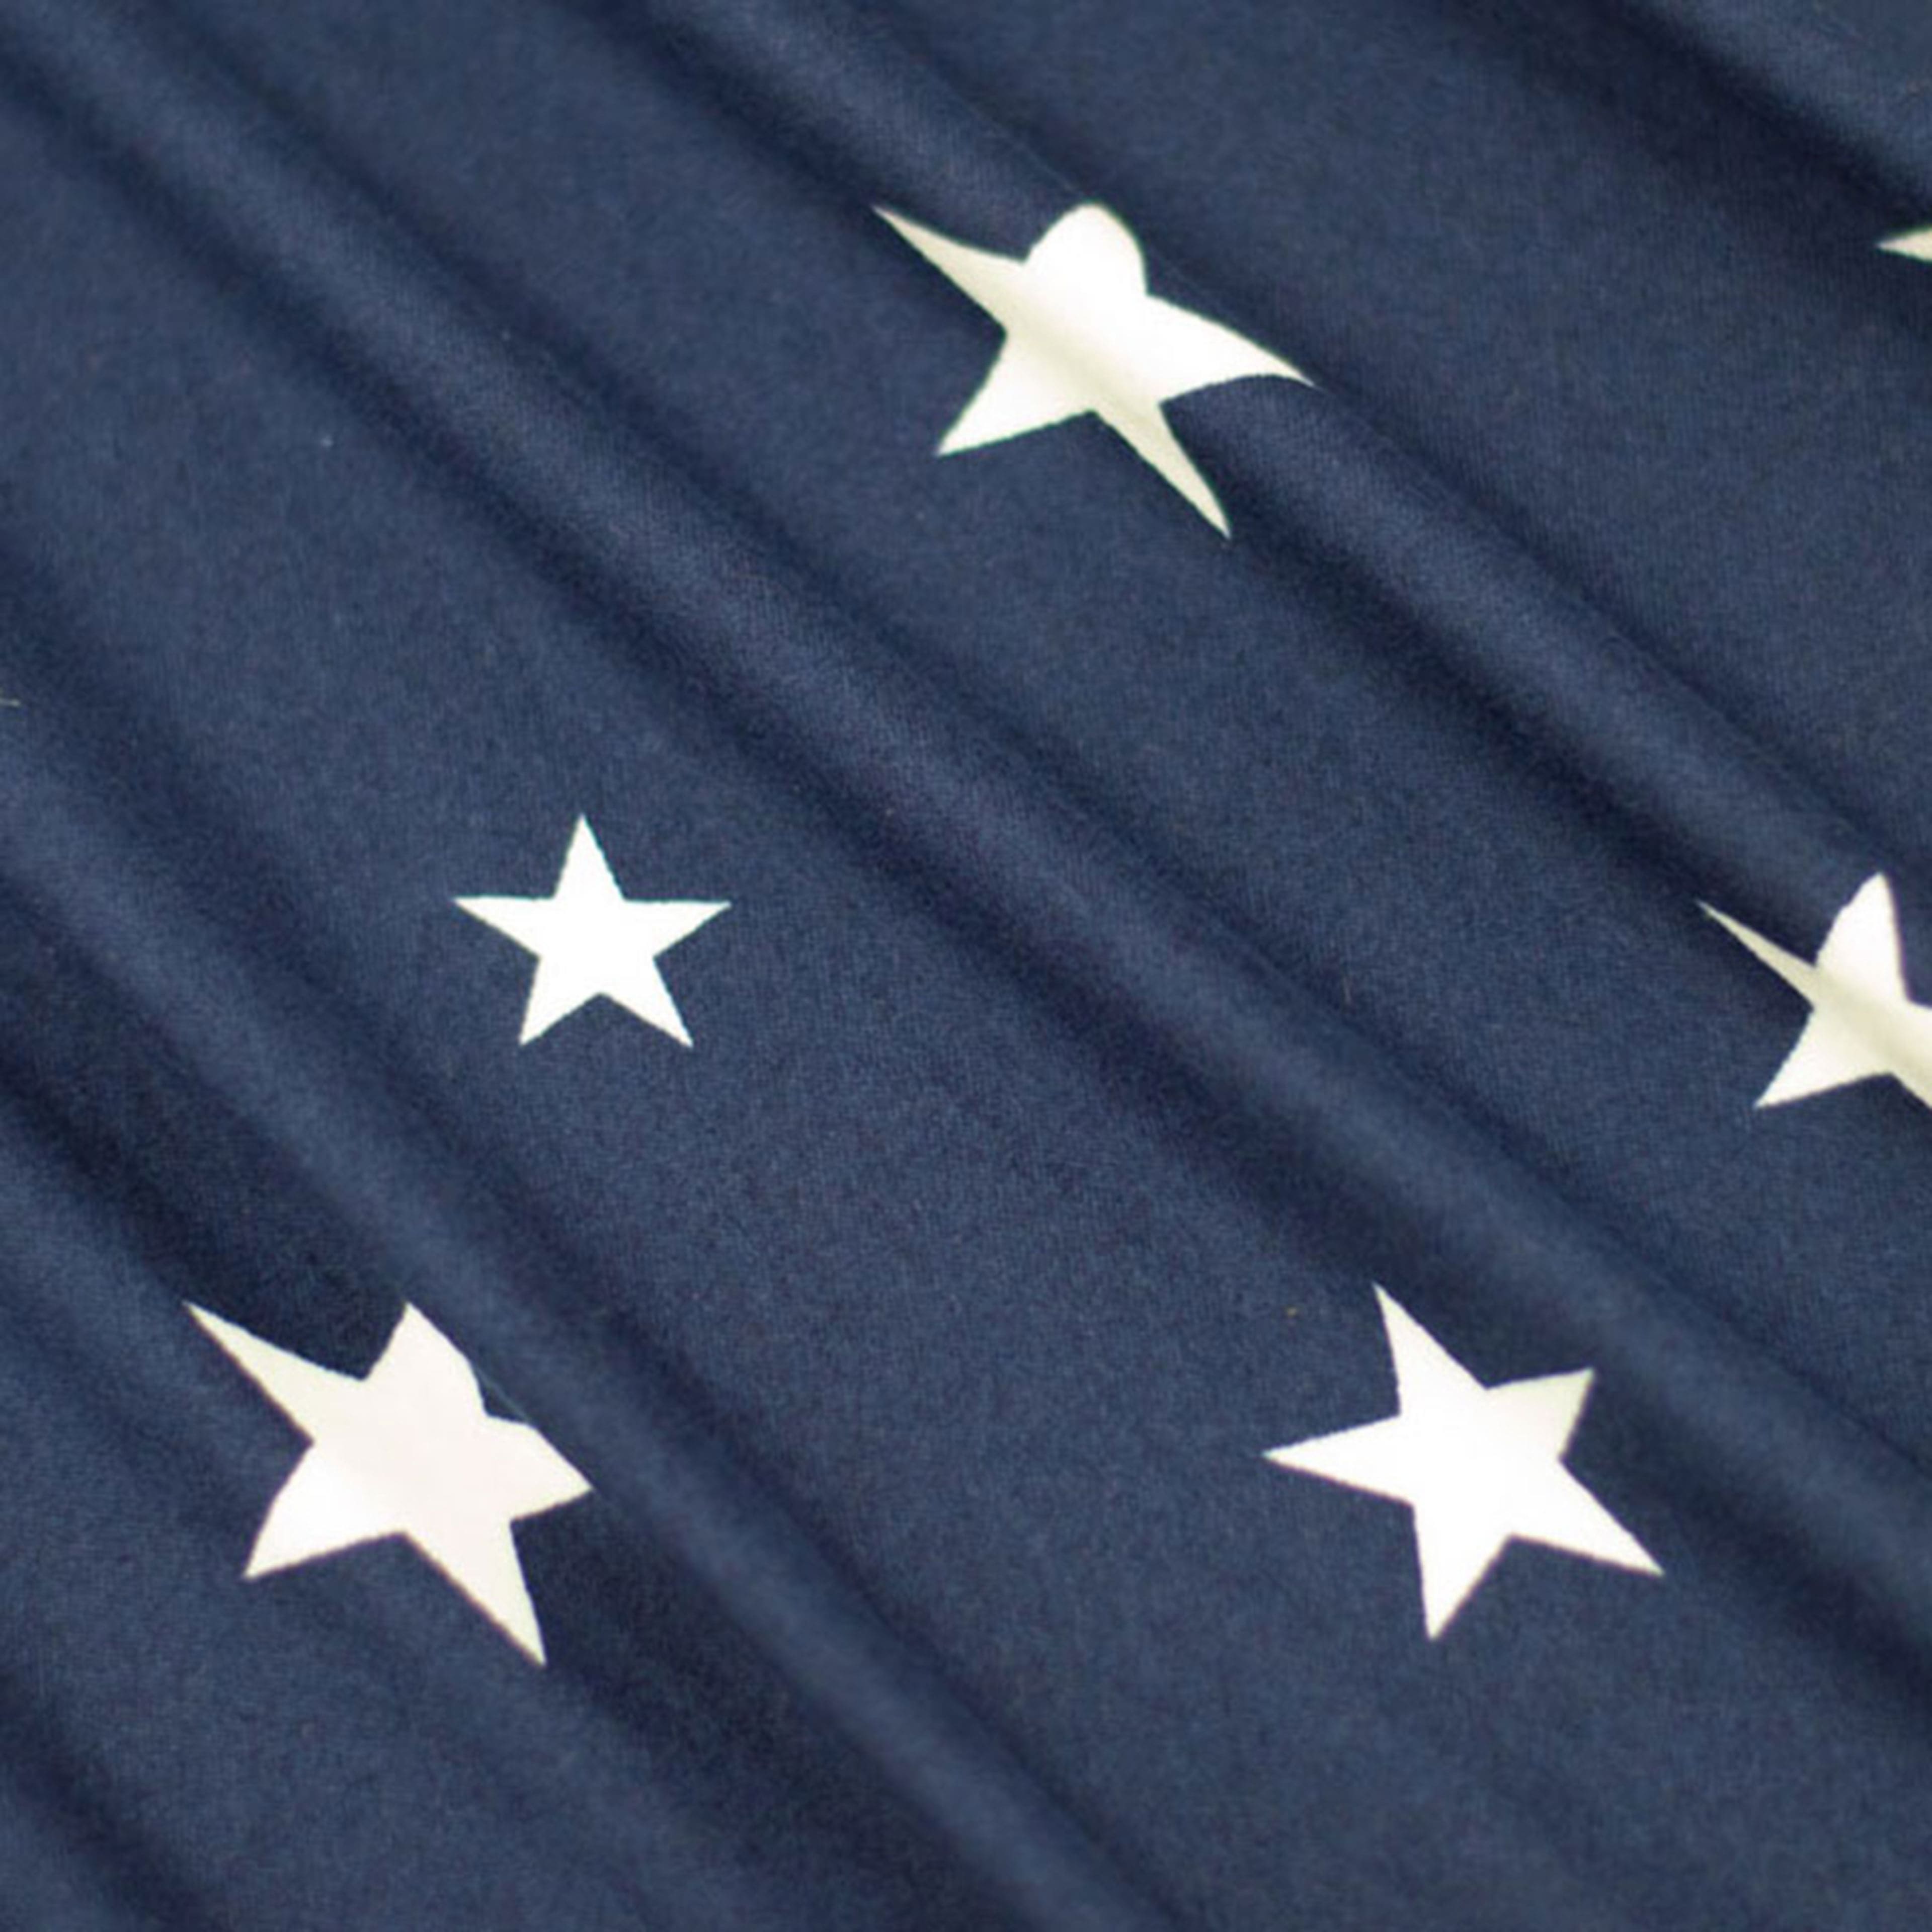 Fabric Merchants Stars on Blue Double Brushed Stretch Fabric